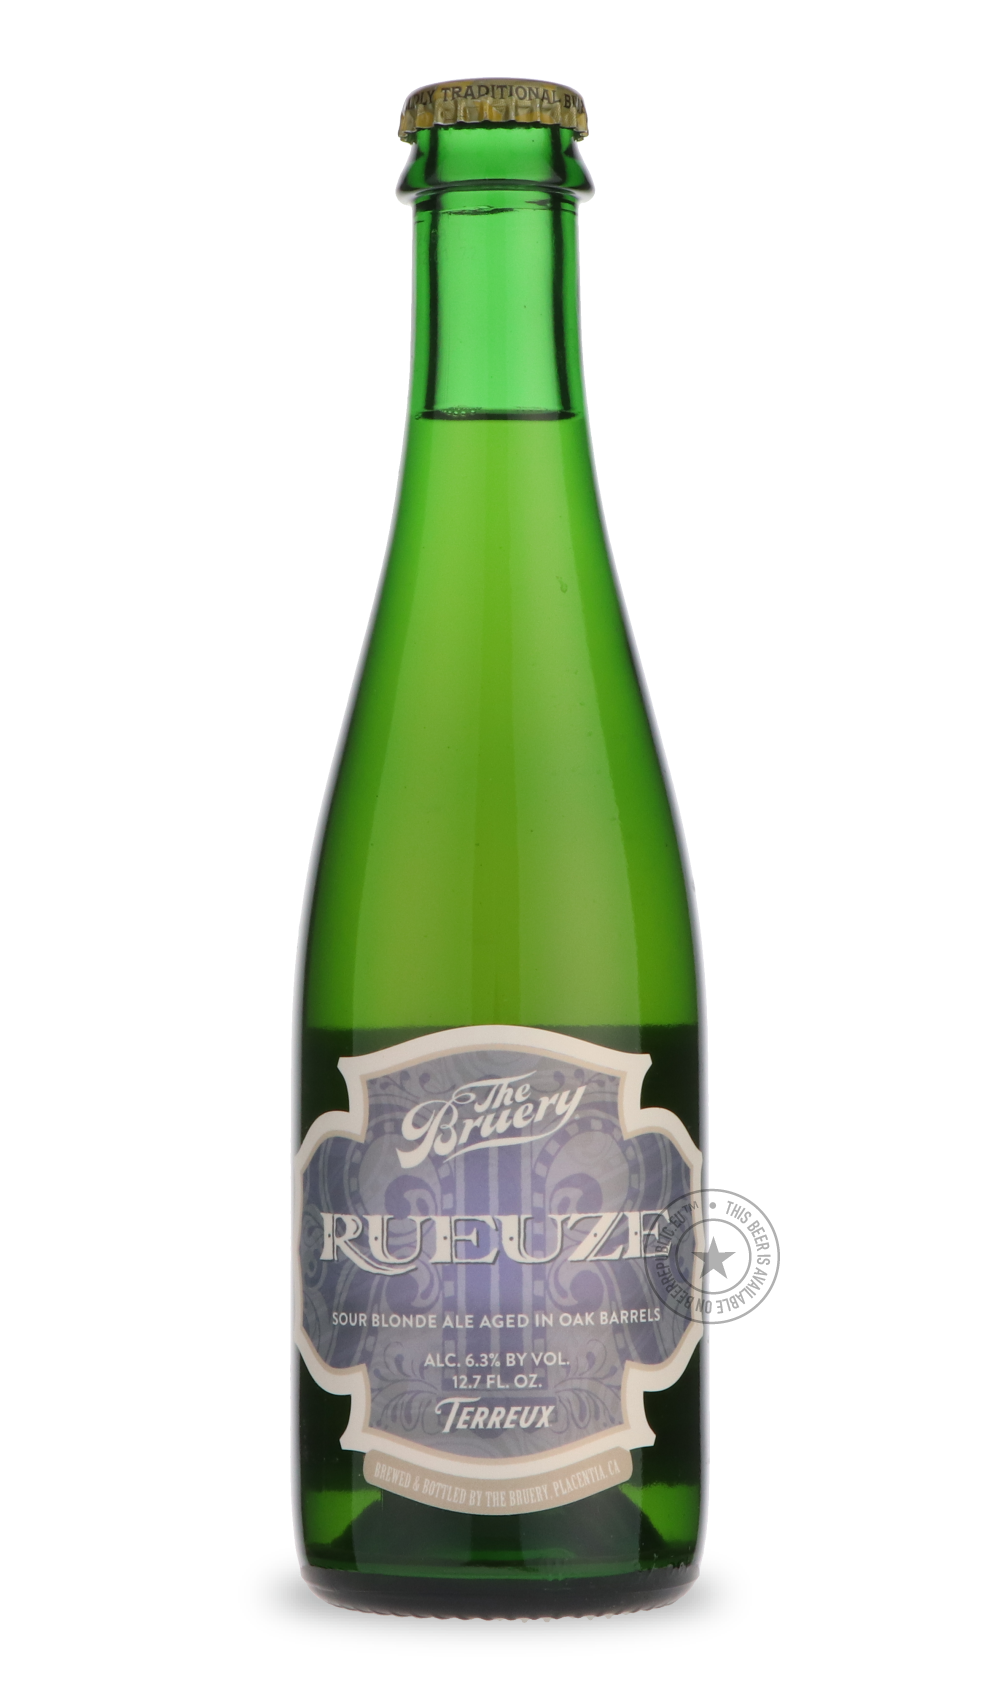 -The Bruery- Terreux Rueuze-Sour / Wild & Fruity- Only @ Beer Republic - The best online beer store for American & Canadian craft beer - Buy beer online from the USA and Canada - Bier online kopen - Amerikaans bier kopen - Craft beer store - Craft beer kopen - Amerikanisch bier kaufen - Bier online kaufen - Acheter biere online - IPA - Stout - Porter - New England IPA - Hazy IPA - Imperial Stout - Barrel Aged - Barrel Aged Imperial Stout - Brown - Dark beer - Blond - Blonde - Pilsner - Lager - Wheat - Weize